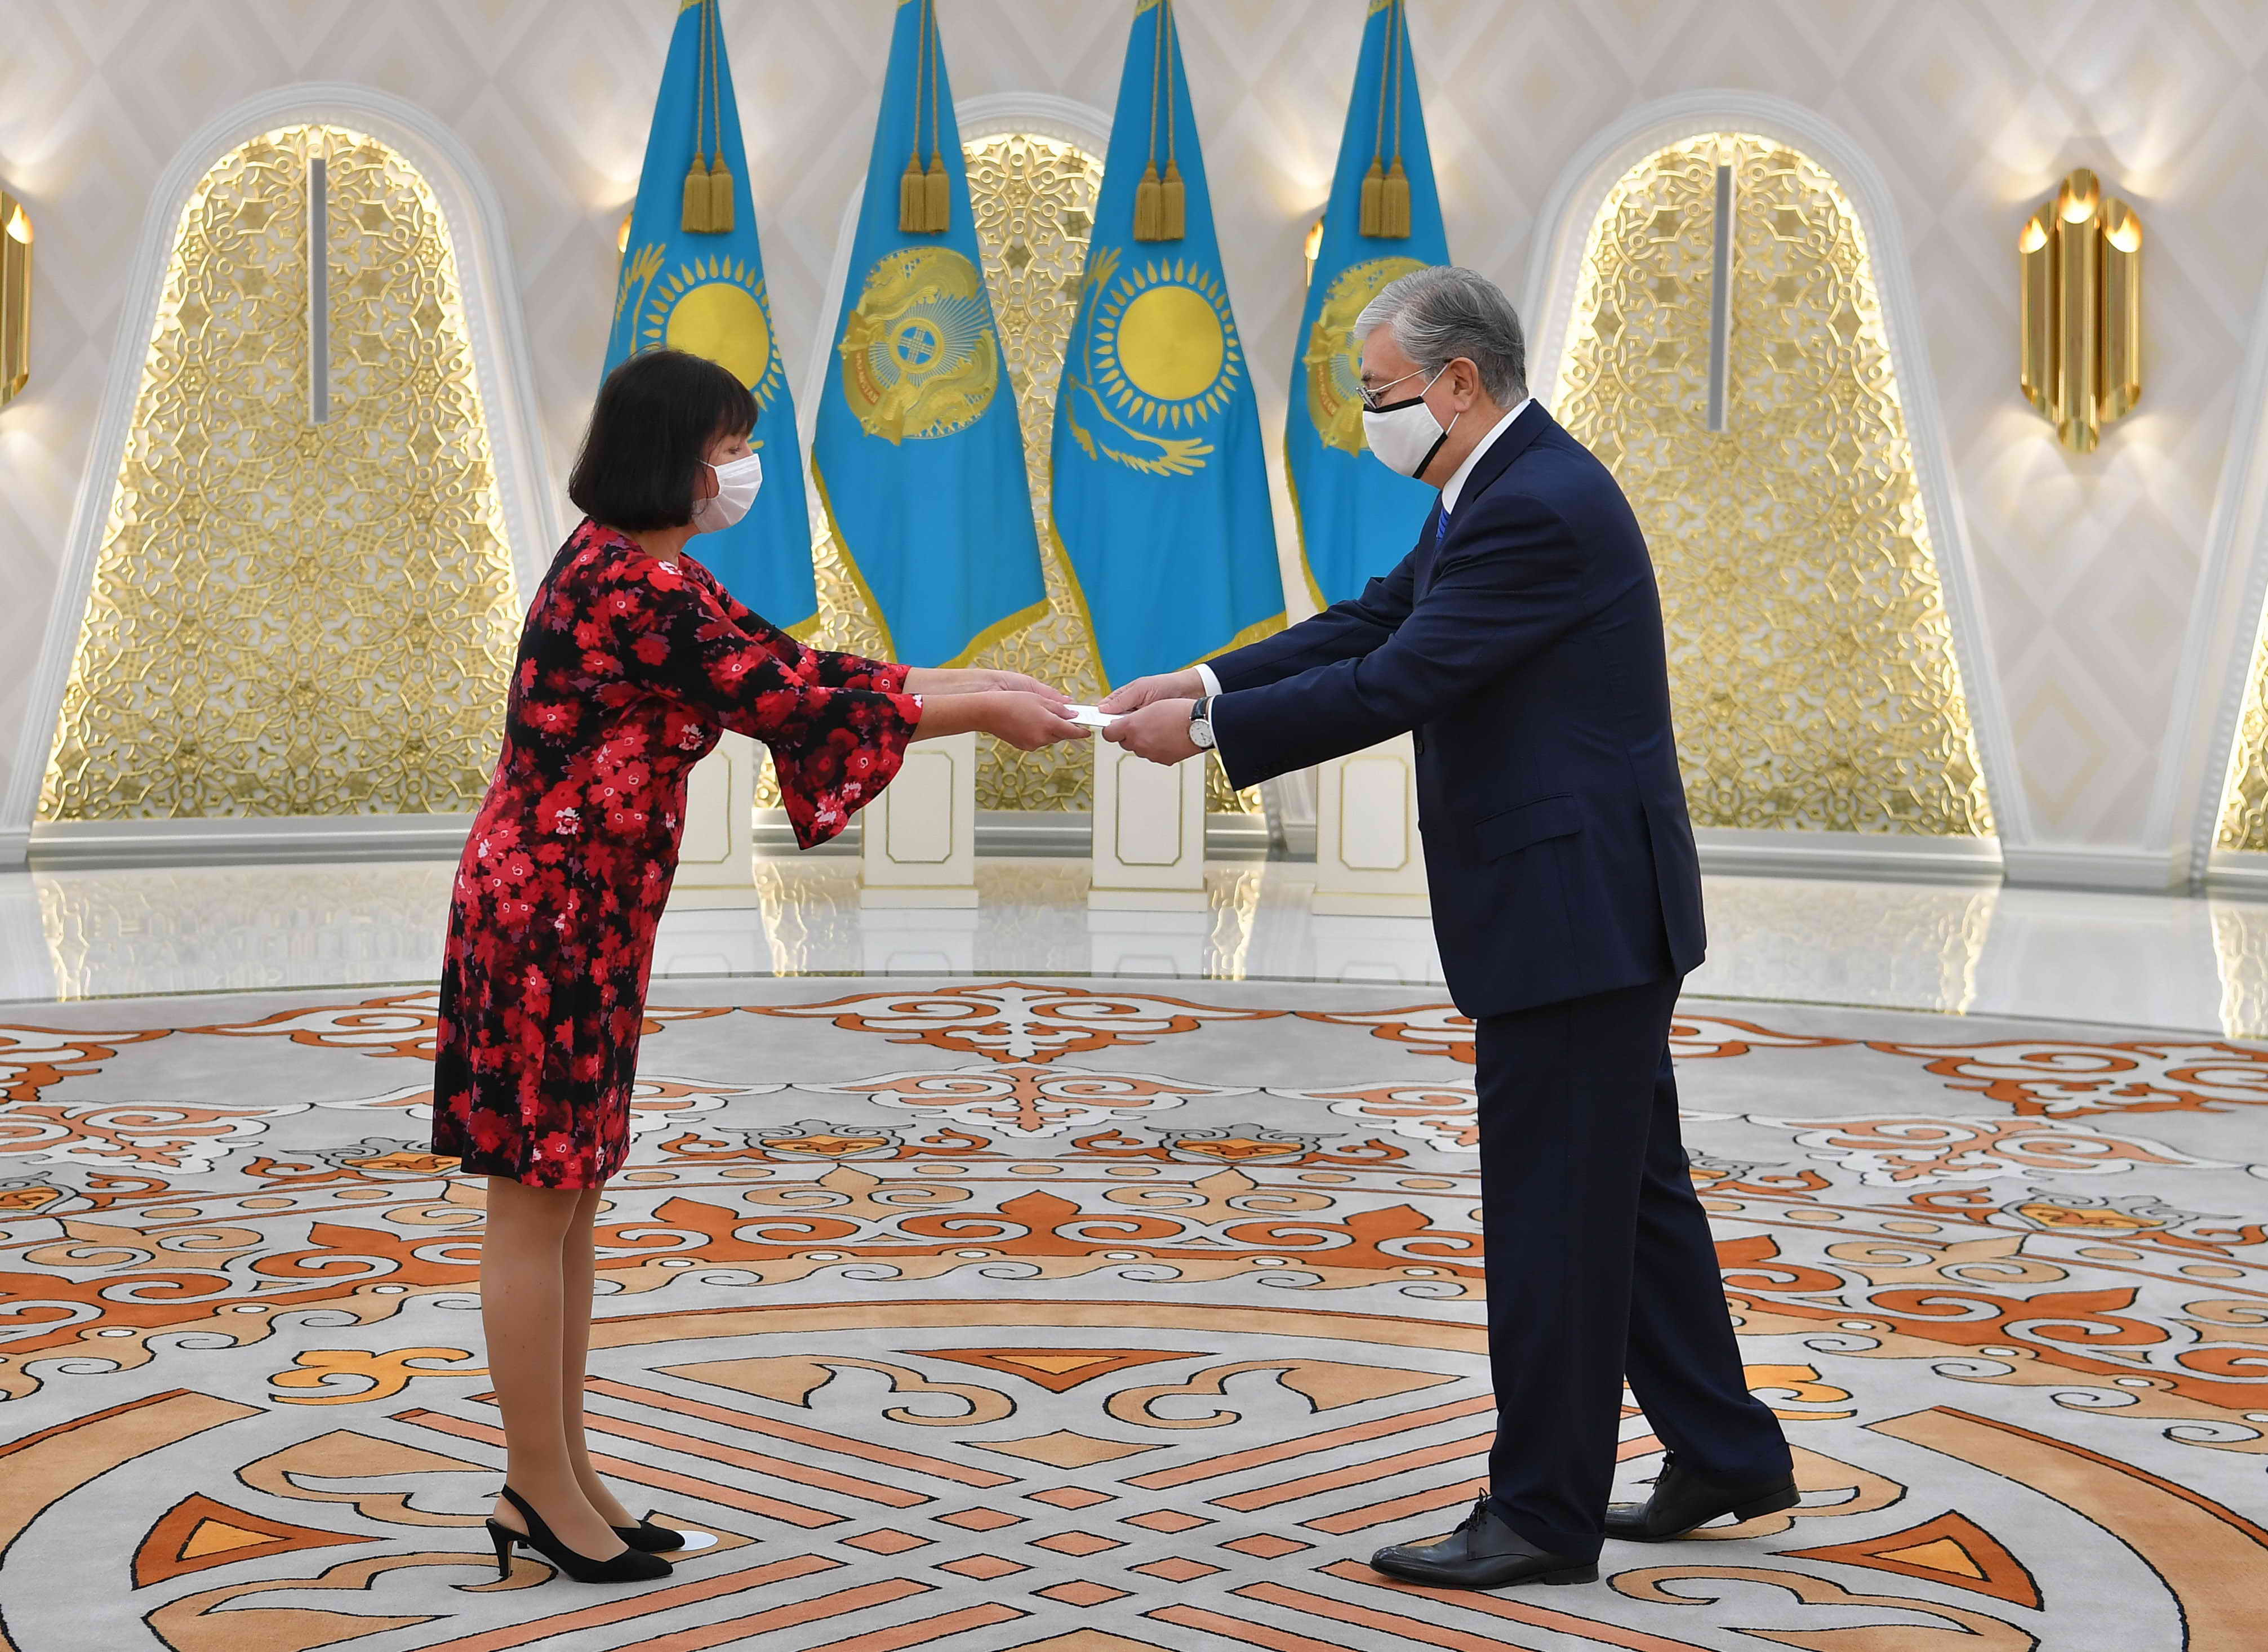 Ambassador presenting her credentials to the president